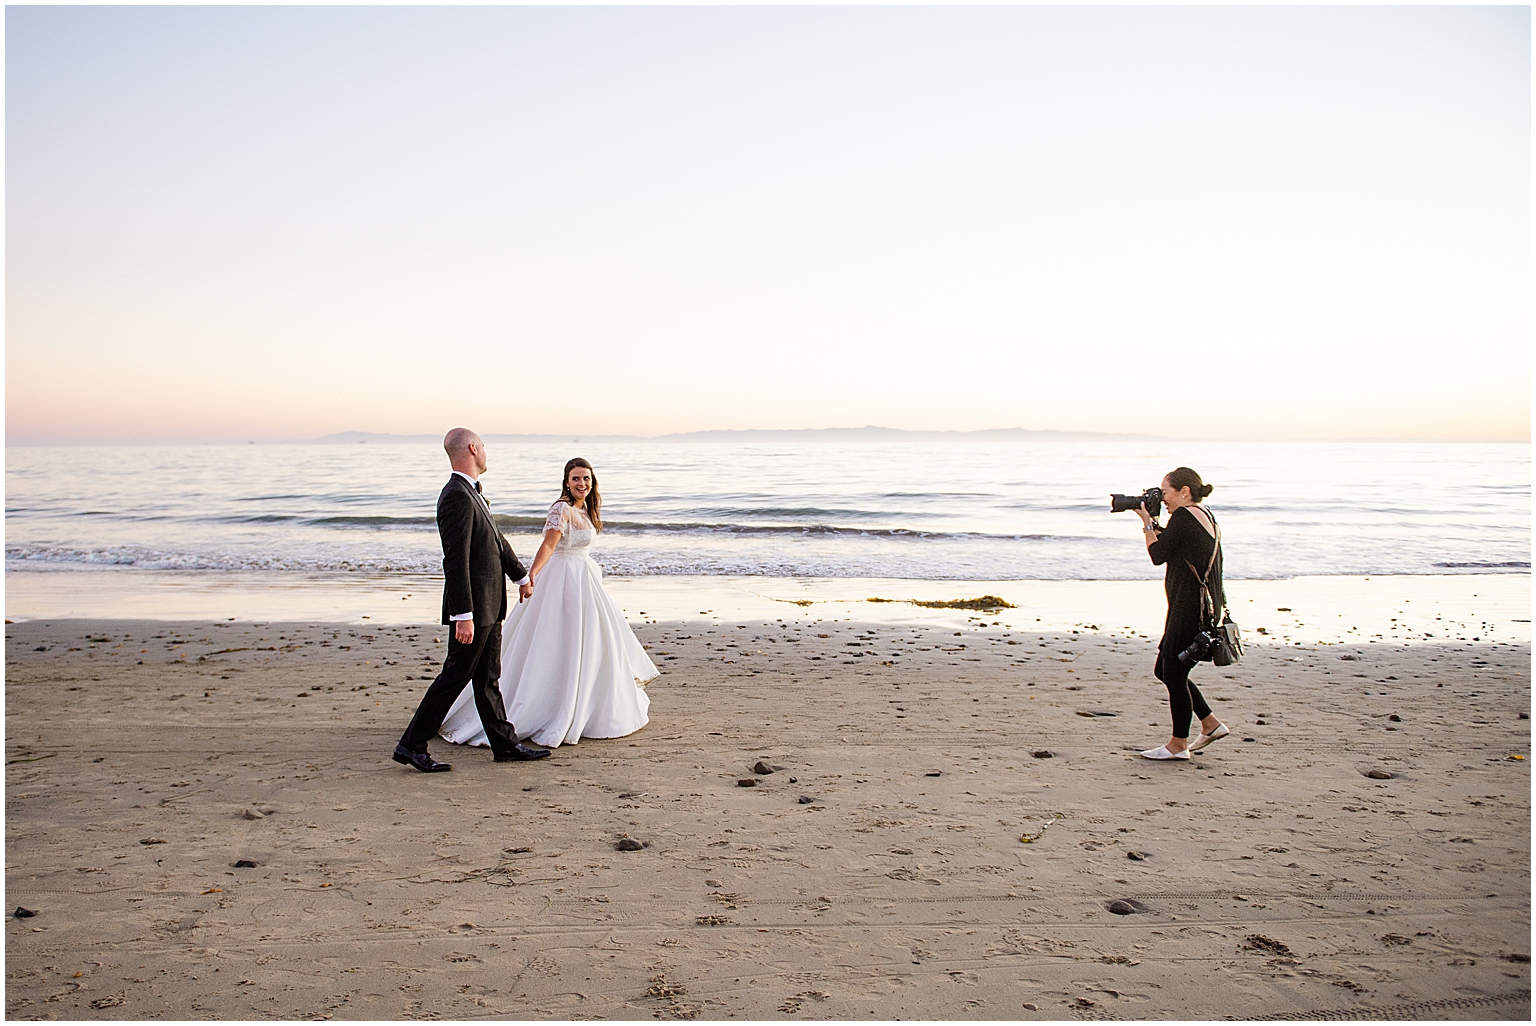 wedding photographer taking photos of bride and groom, bride and groom on the beach